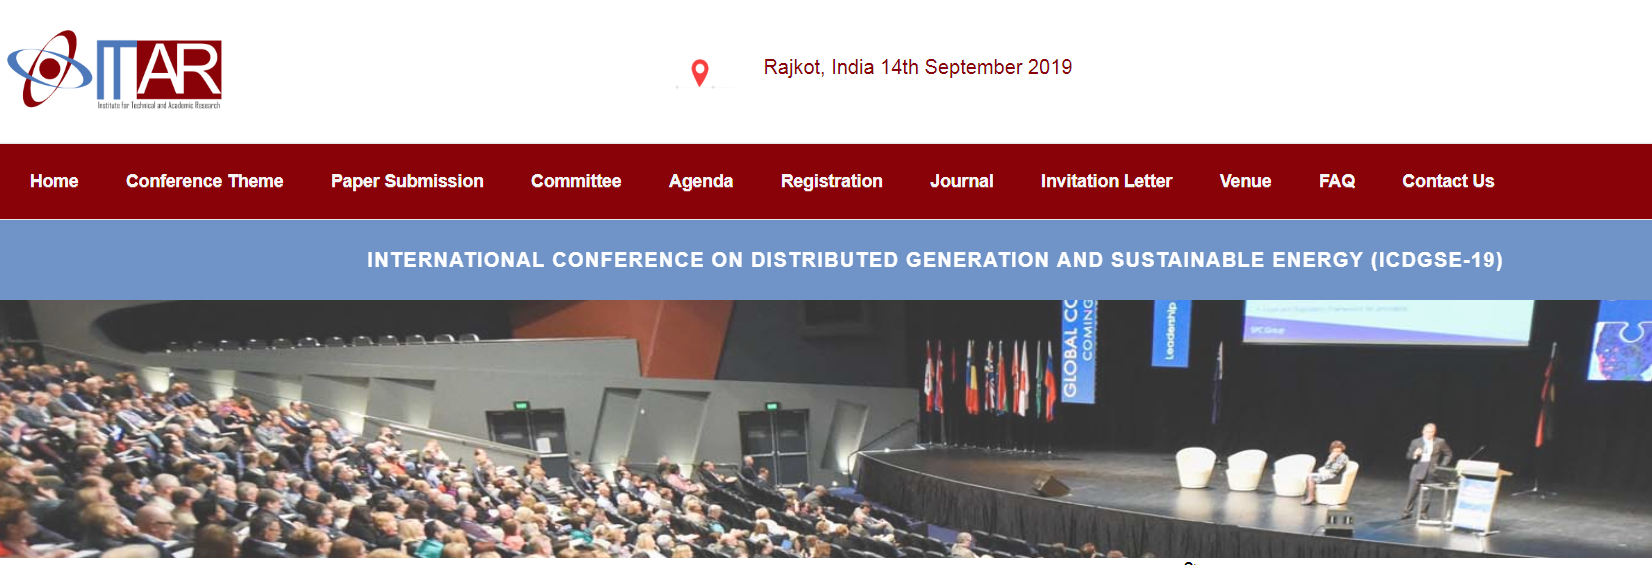 International Conference On Distributed Generation And Substainable Energy (ICDGSE-19), Rajkot, Gujarat, India